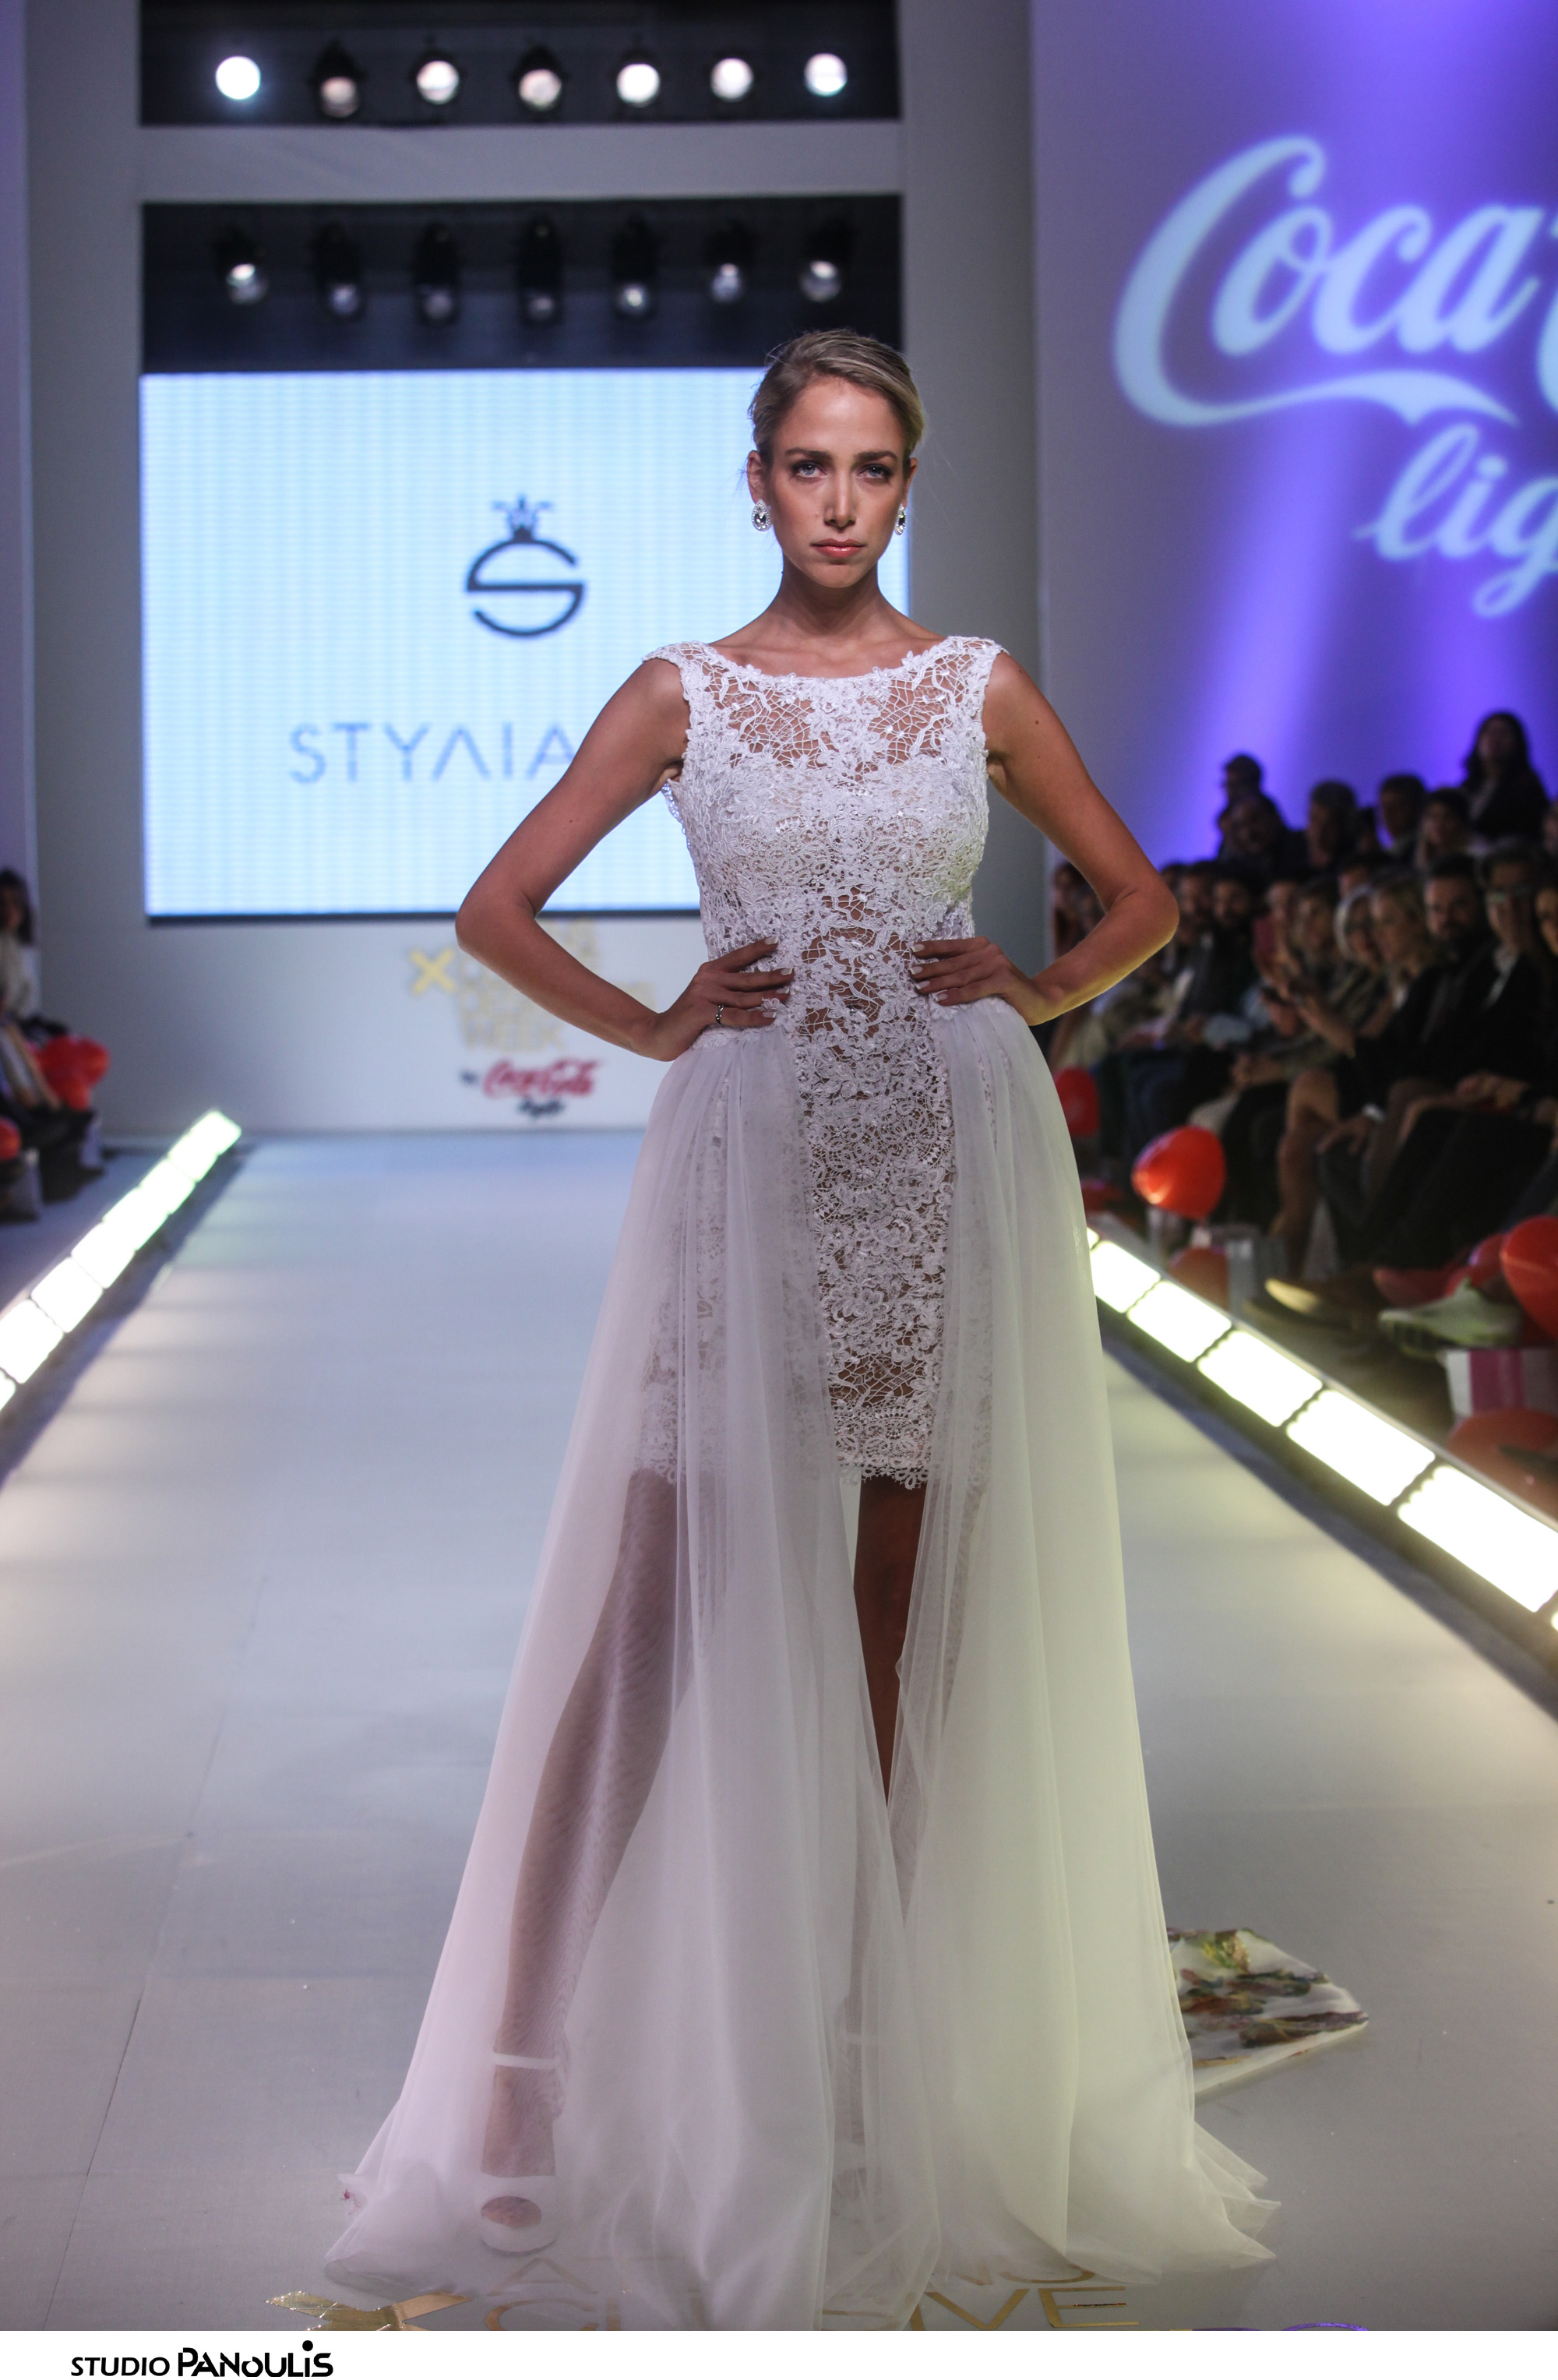  STYLIANOS - special happening/ Catwalk 